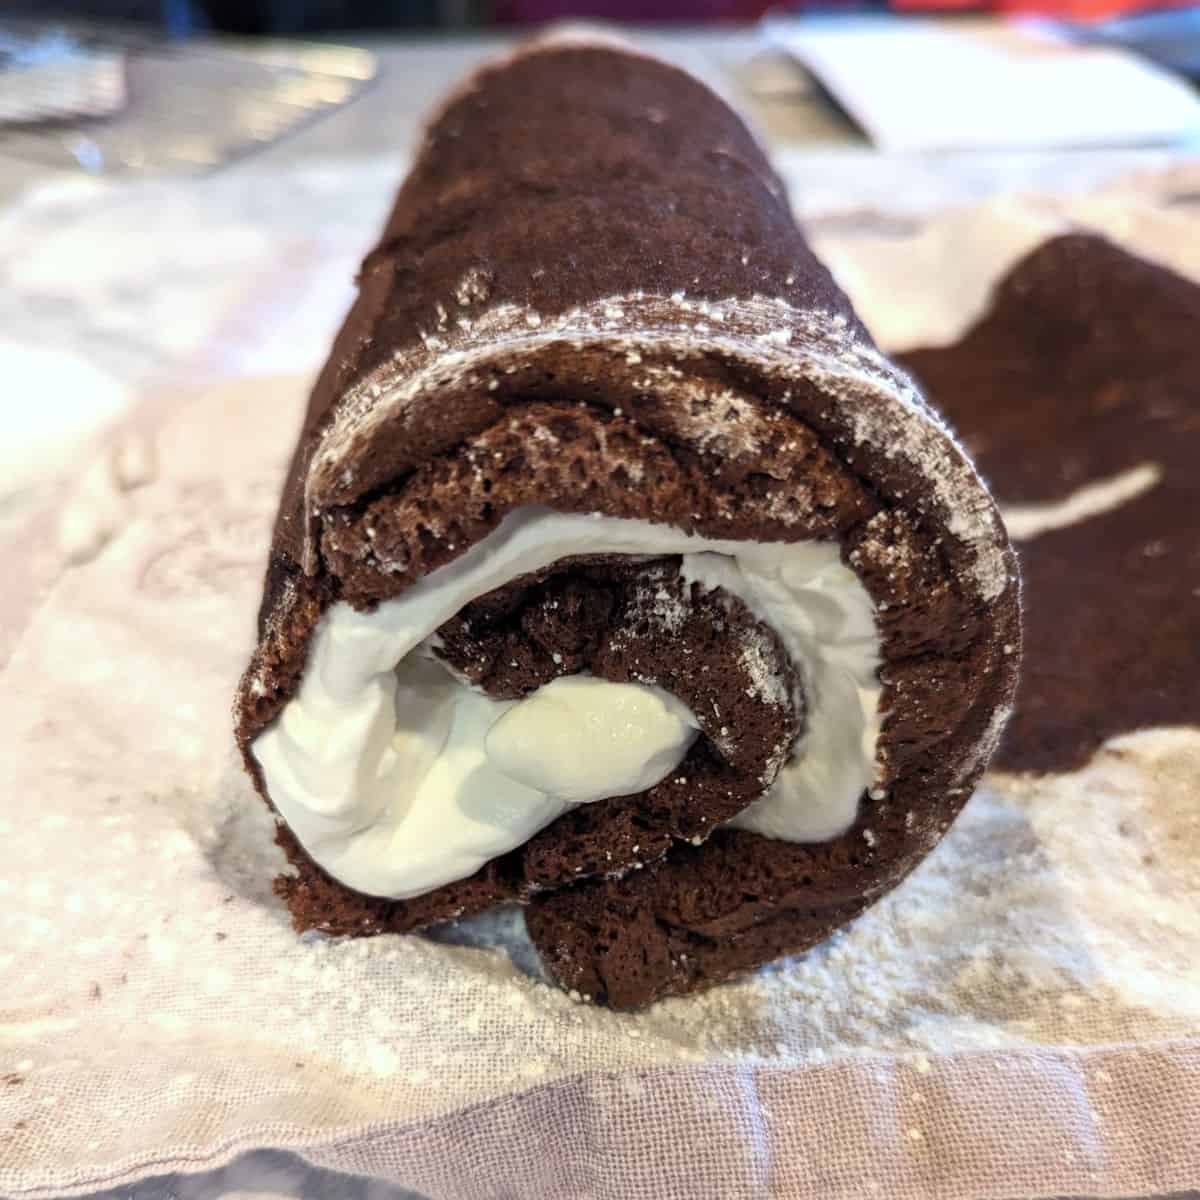 chocolate cake rolled up with whipped cream in the middle